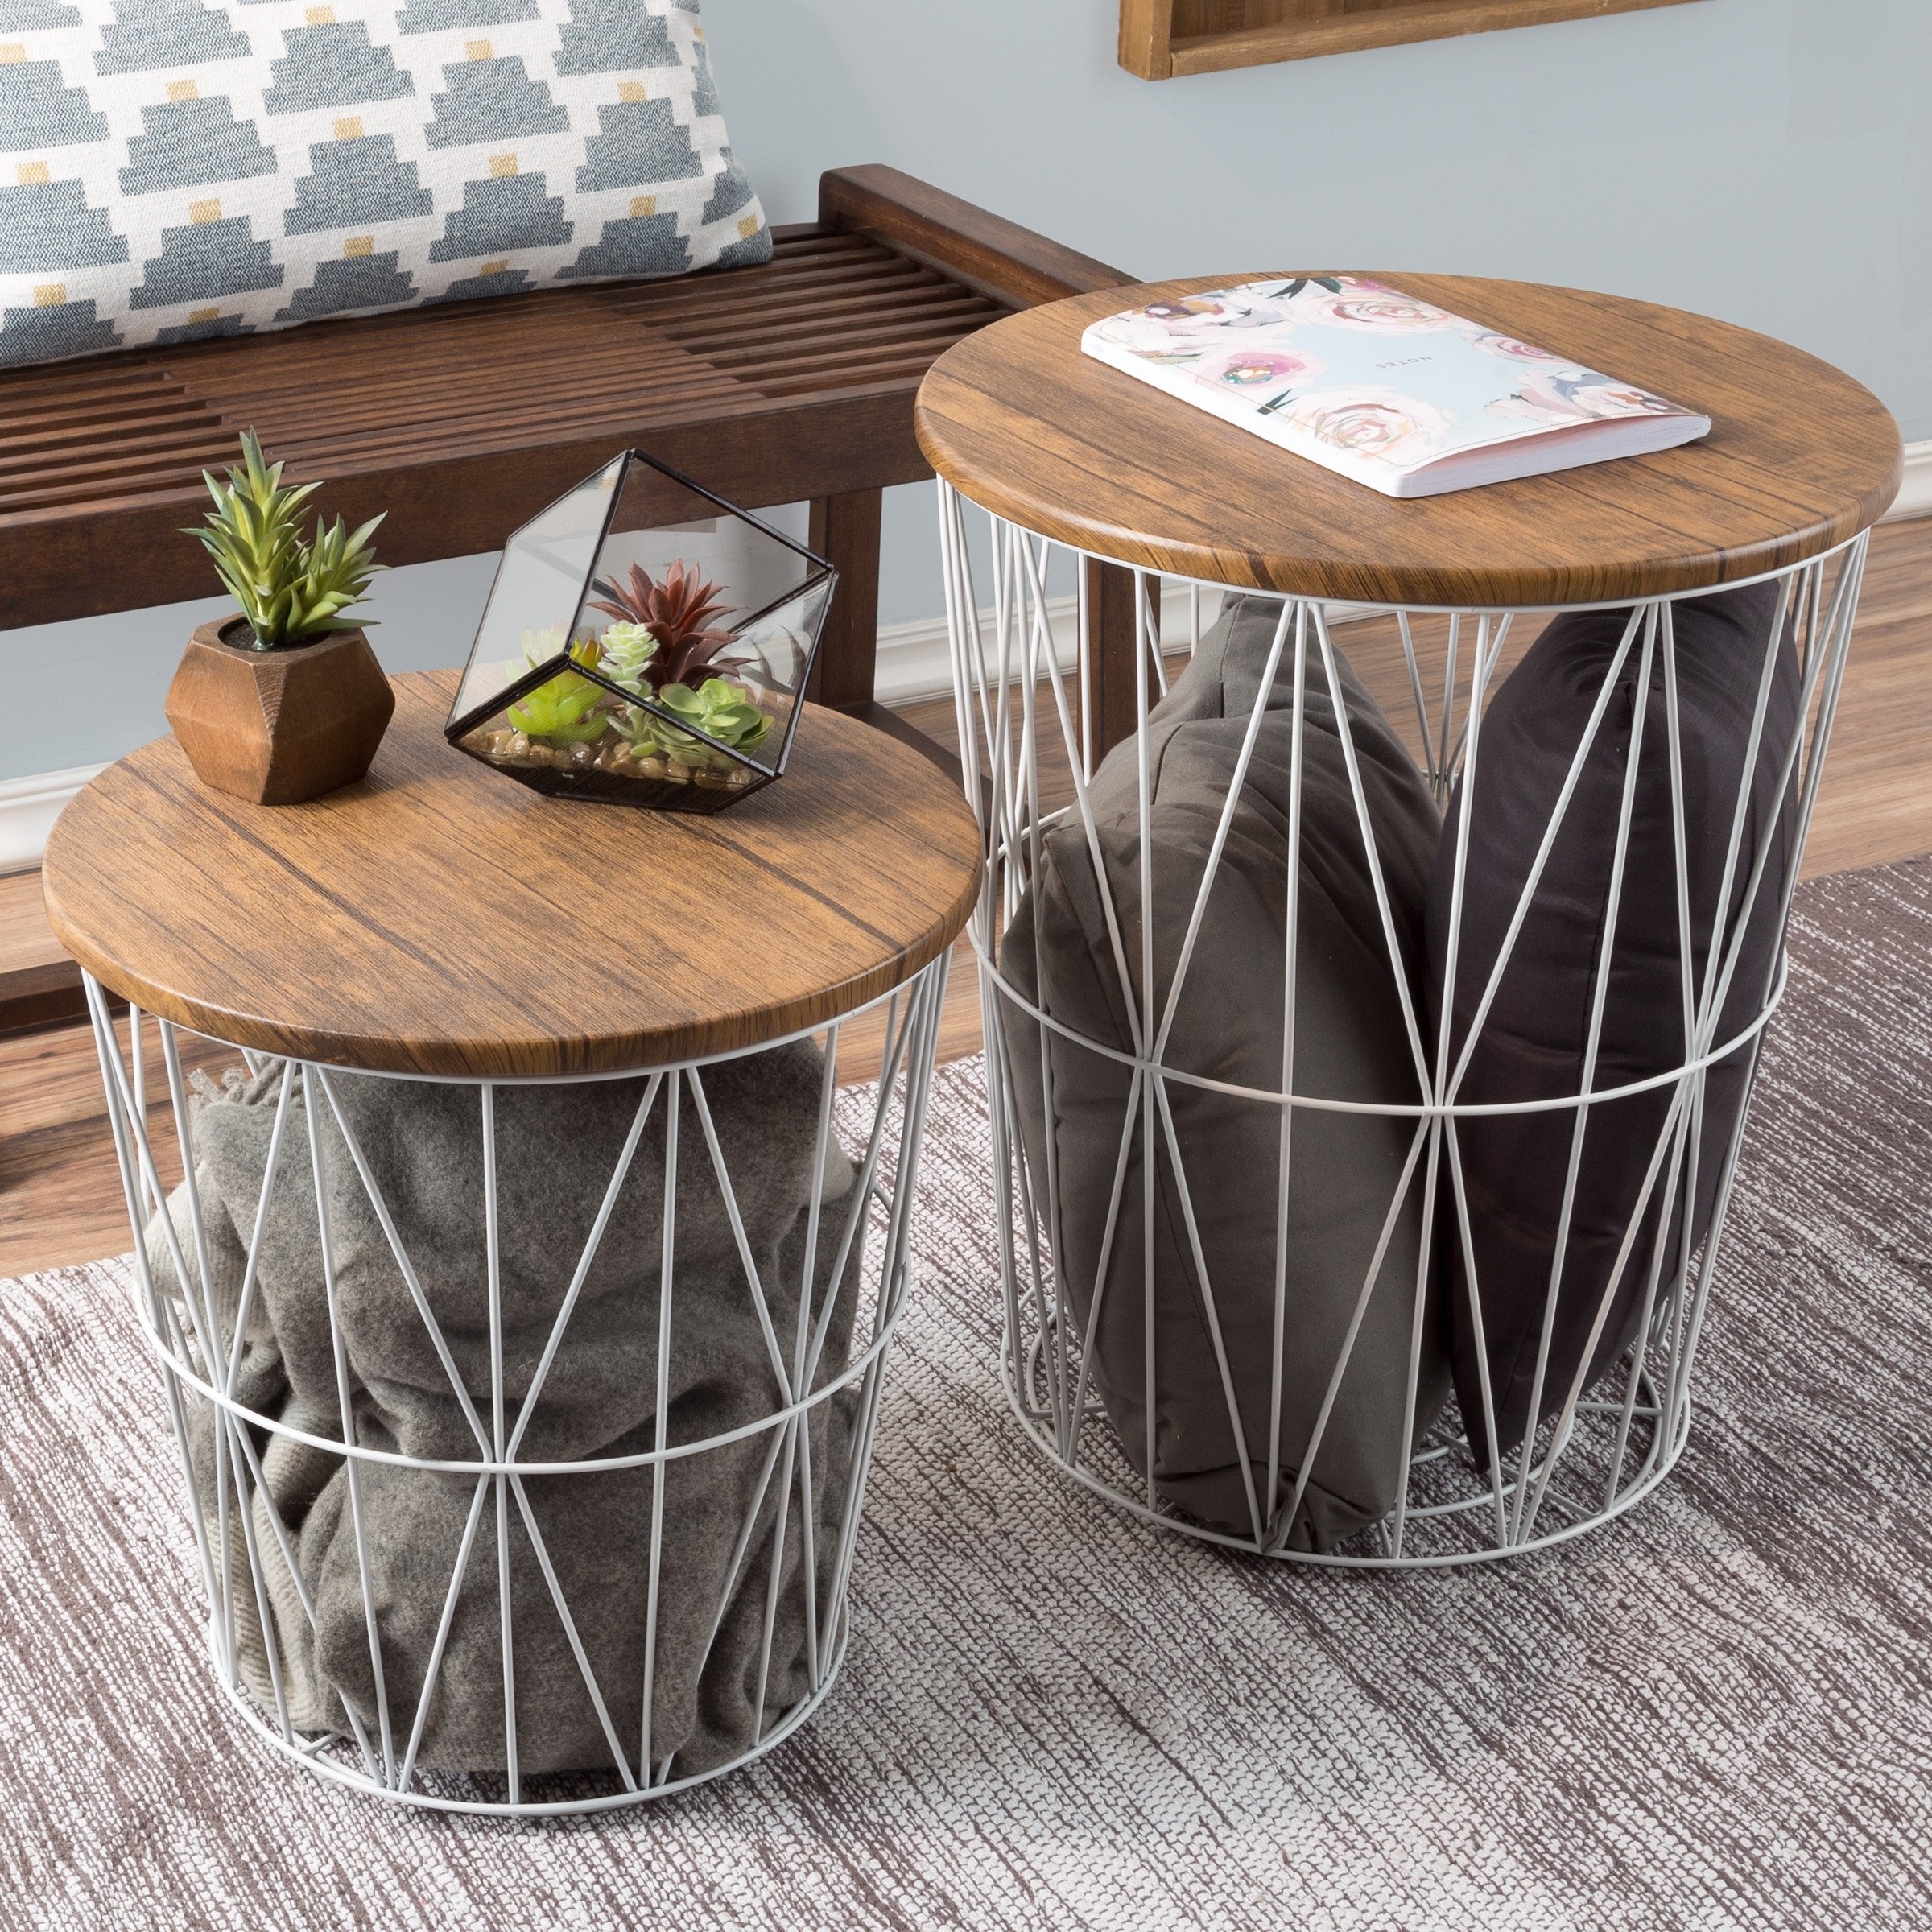 nesting end tables with storage set convertible round metal basket veneer wood top accent side lavish home wire table free shipping today mid century modern dining room plastic